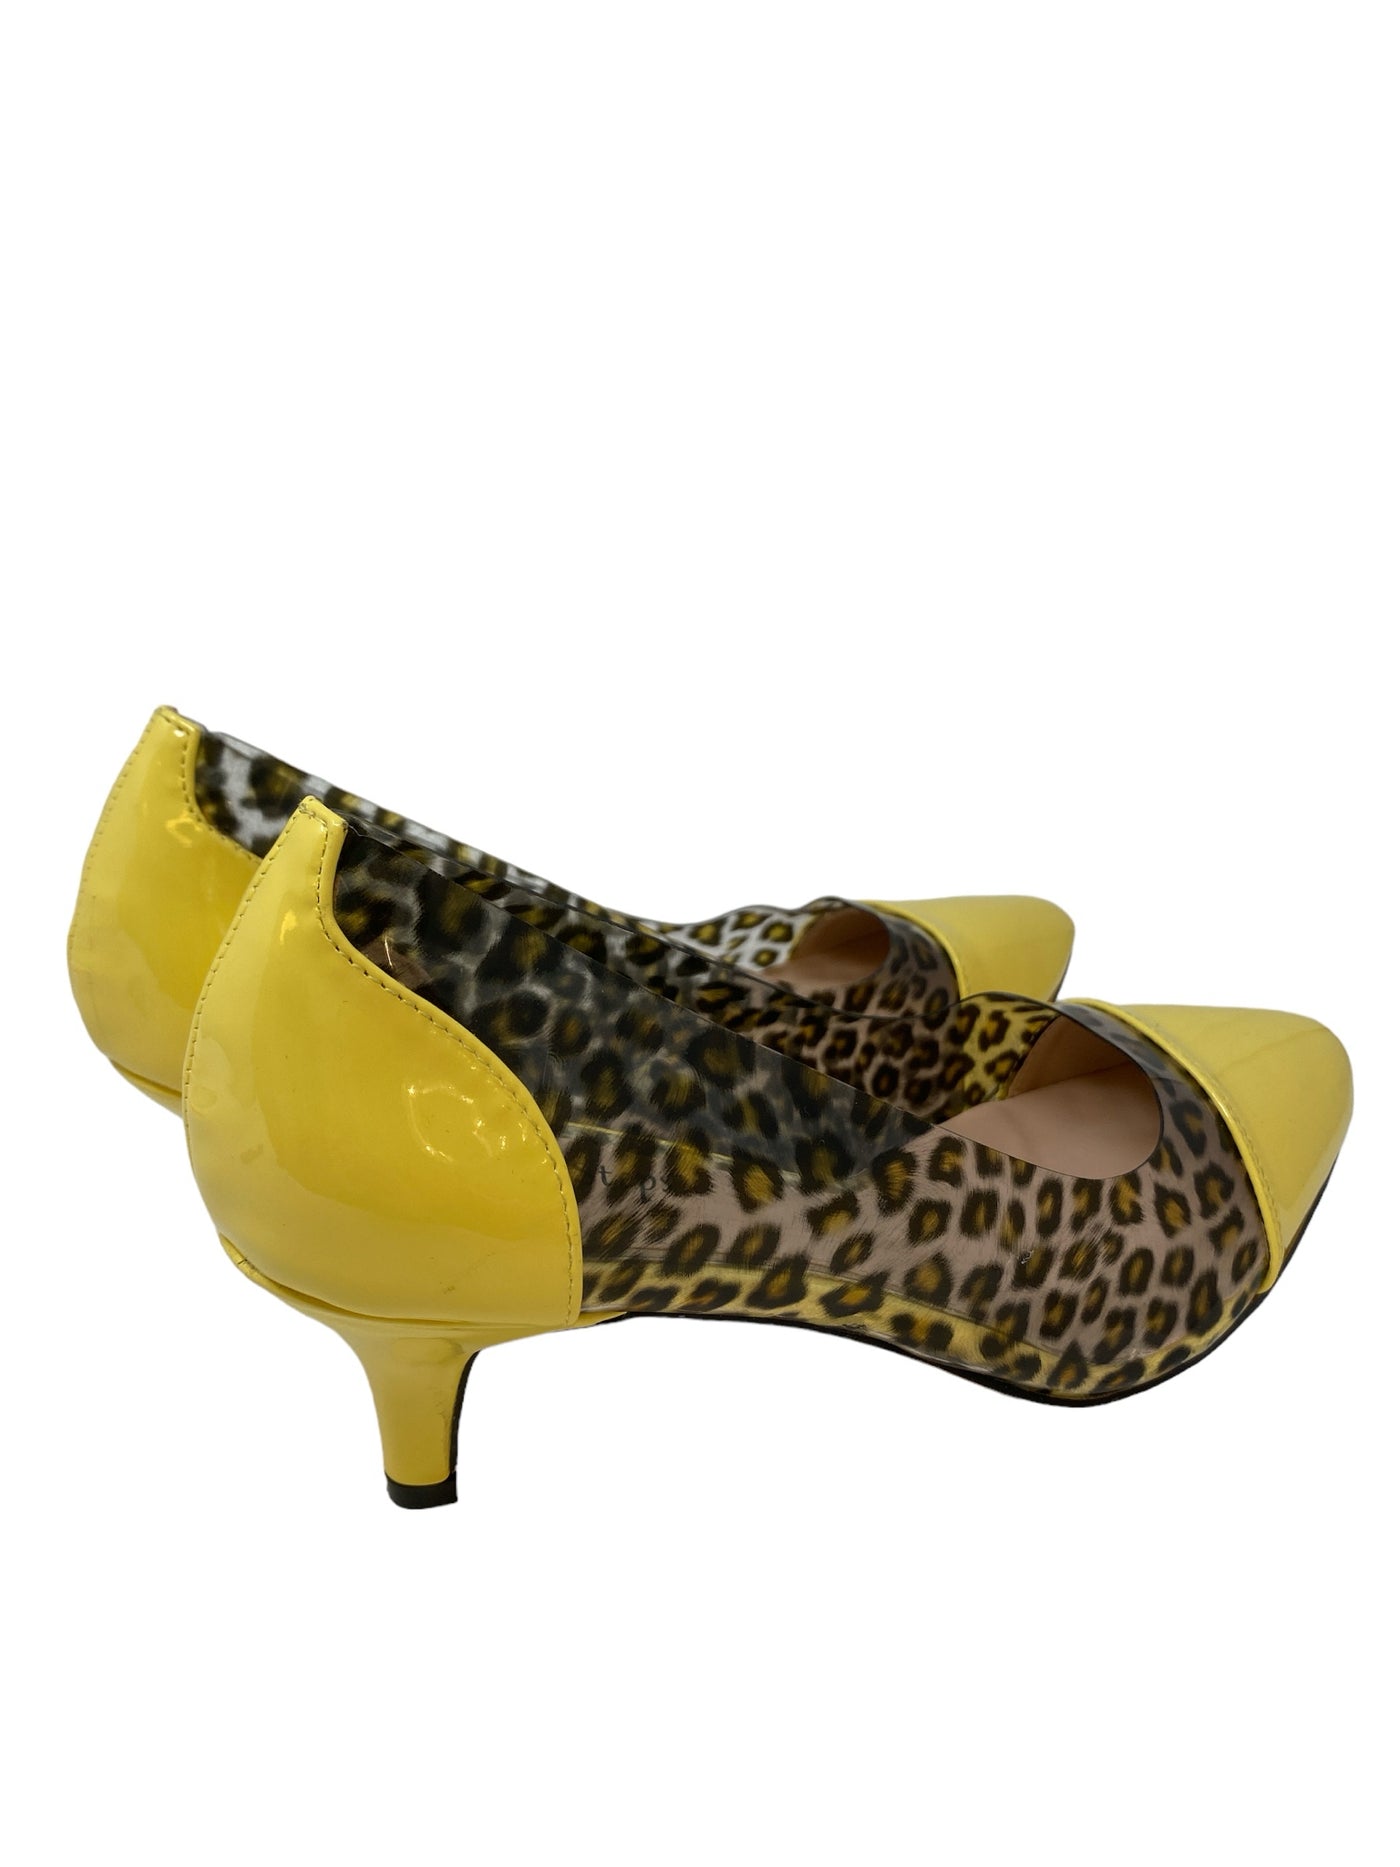 It's SO You Boutique Women Size 8.5 Yellow Animal Heels